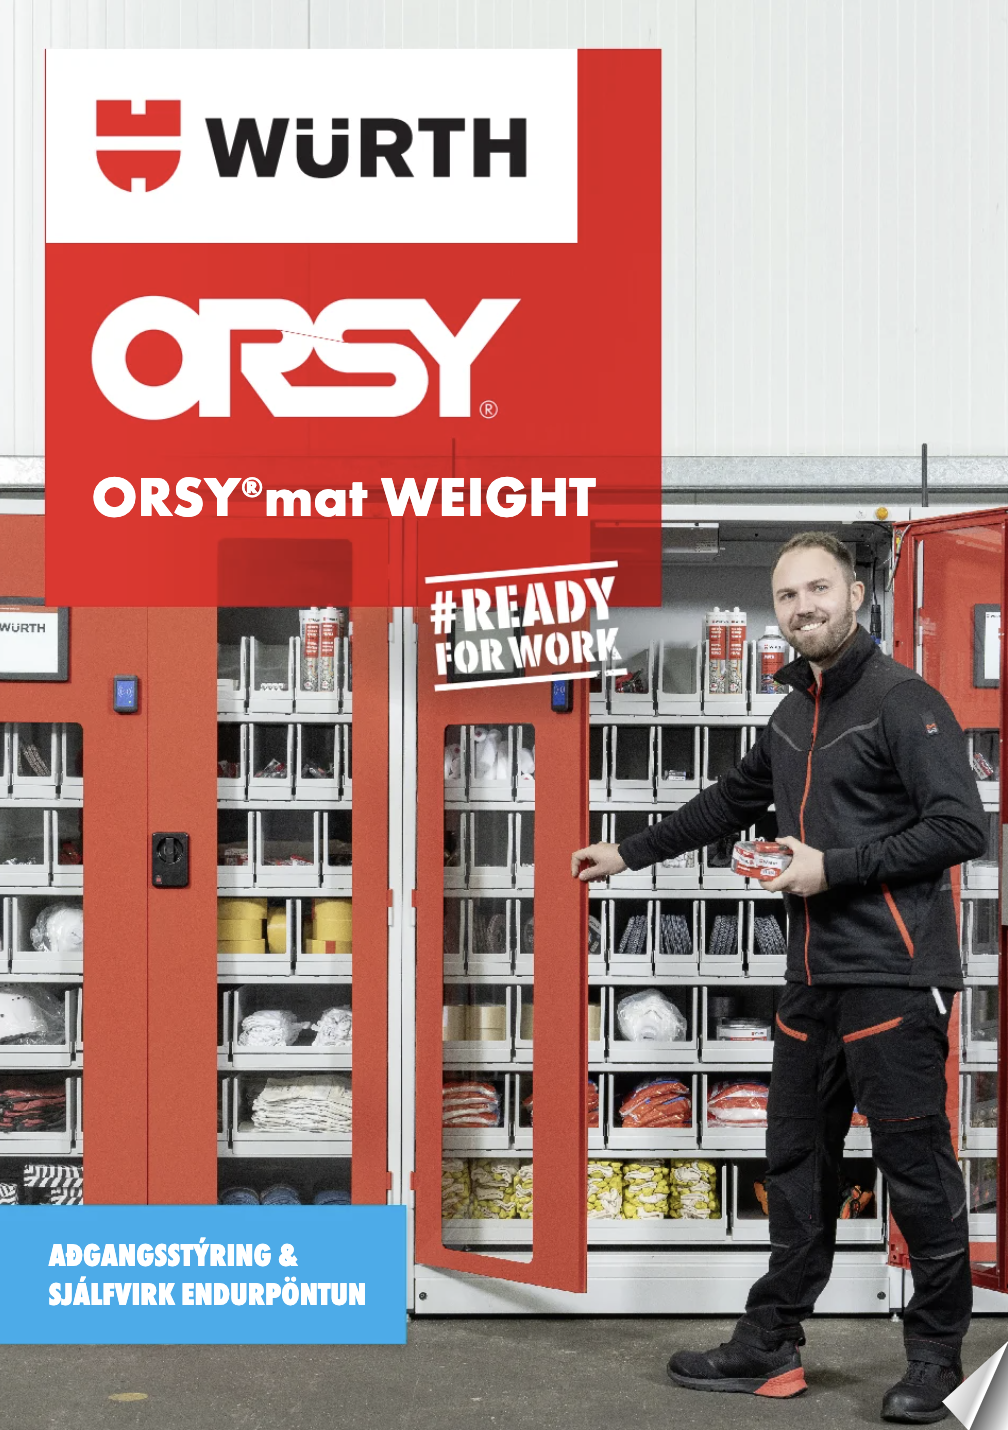 ORSY® mat Weight